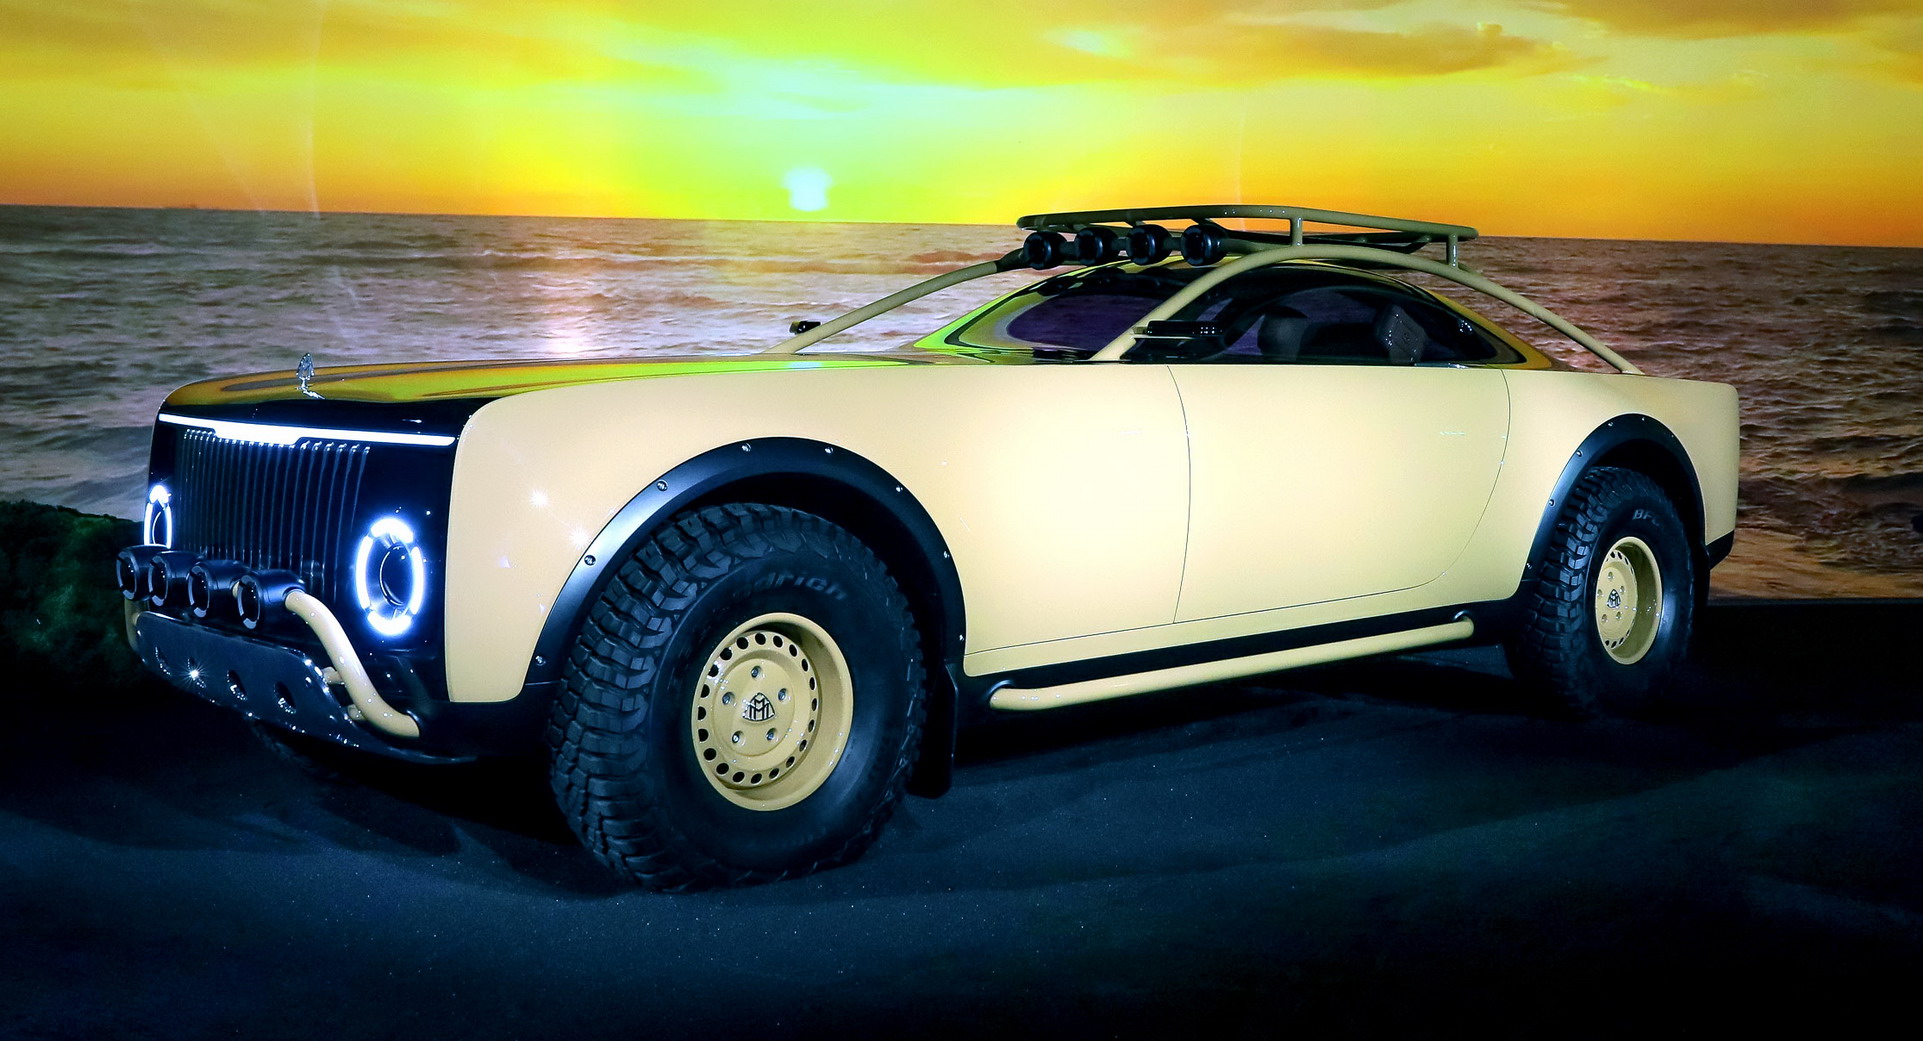 Project Maybach is an absurd, awesome off-road electric coupe - Autoblog